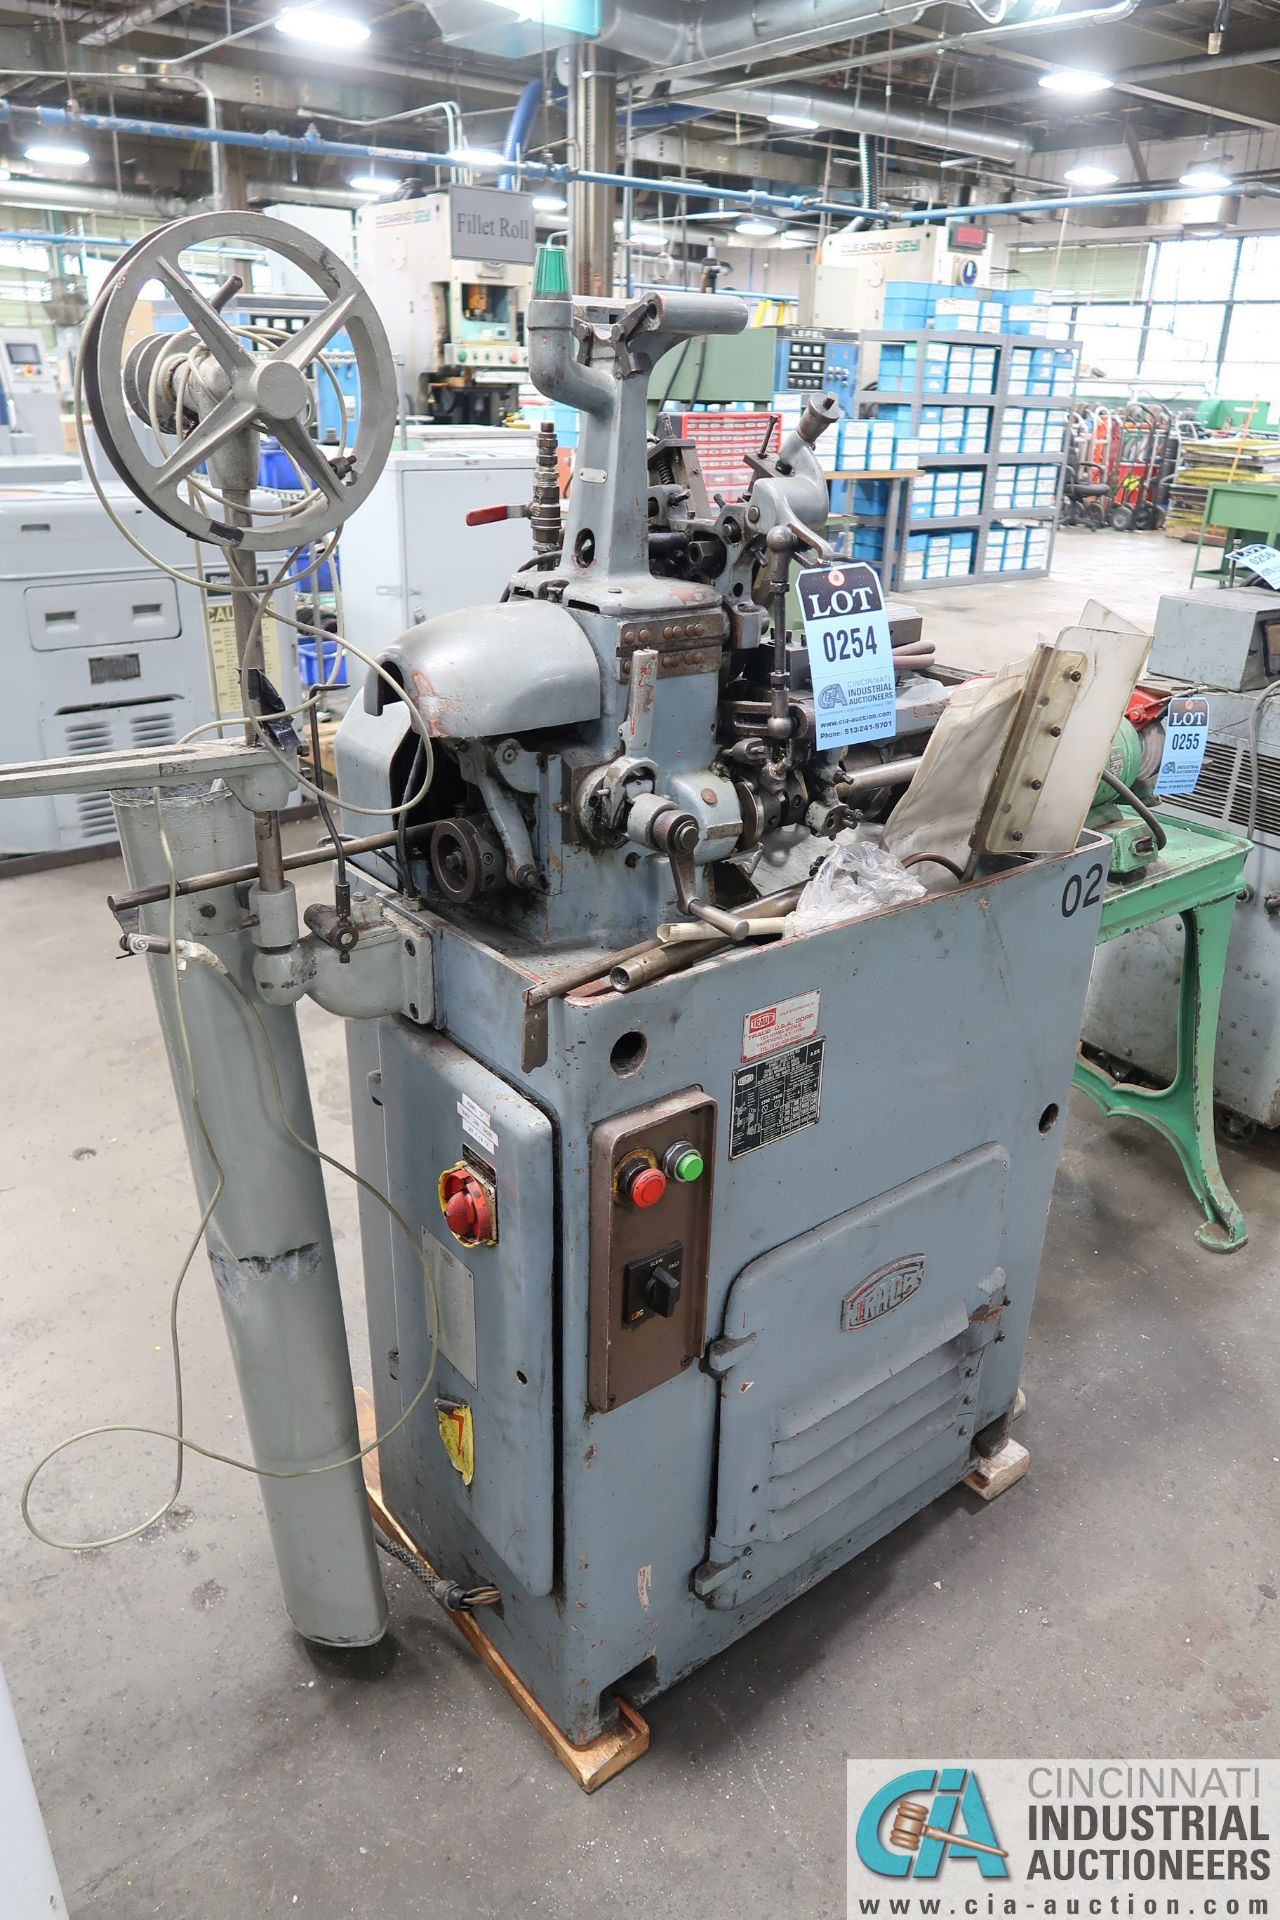 TRAUB MODEL A25 LATHE, SPINDLE SPEED 550 - 3400 RPM - Loading fee due the “ERRA” Pedowitz Machinery